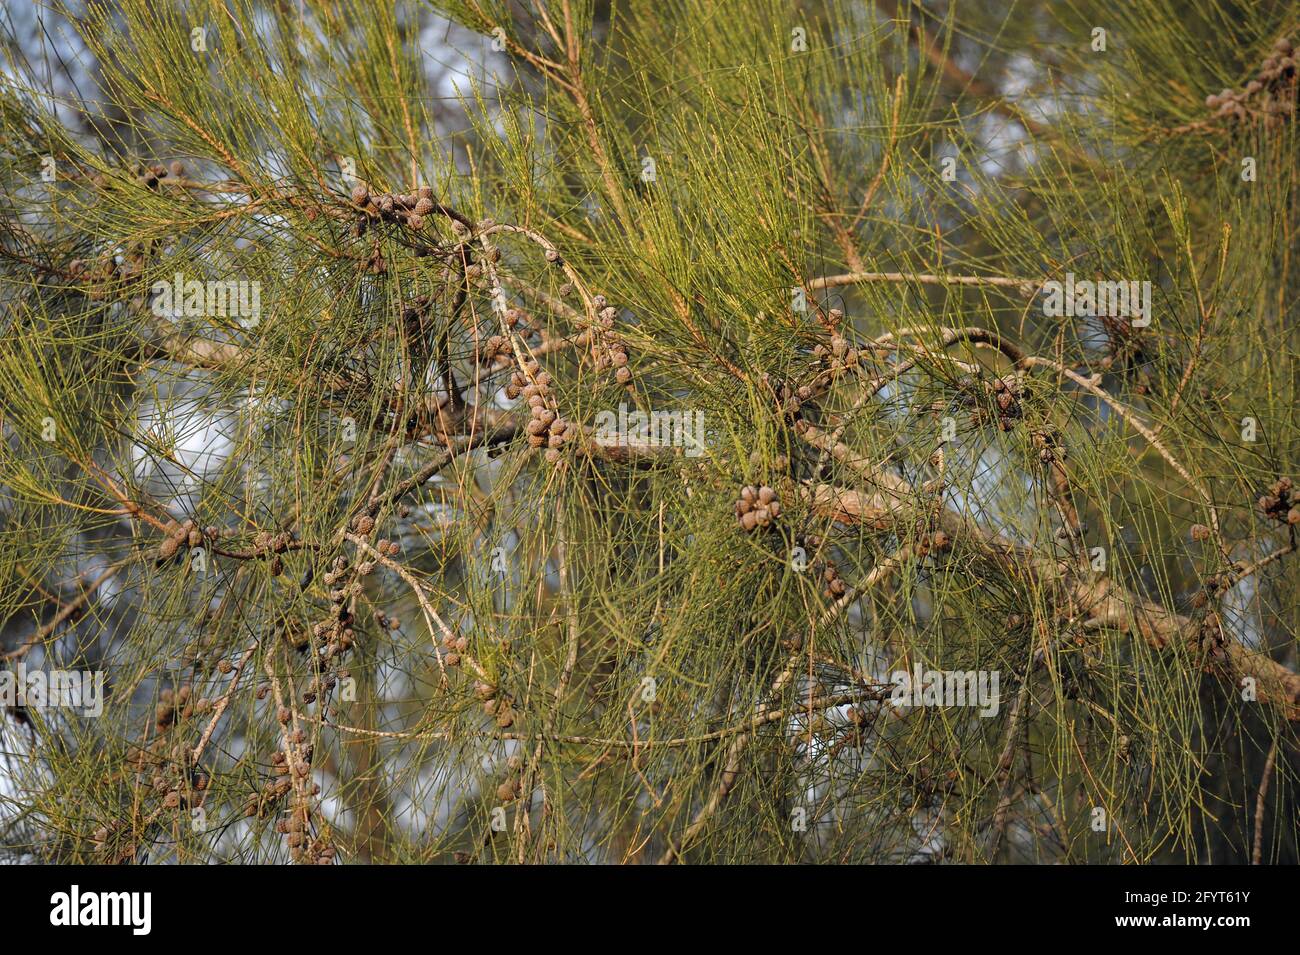 Branches, branchlets and seed pods of the Swamp Oak (Casuarina glauca) tree in NSW, Australia Stock Photo